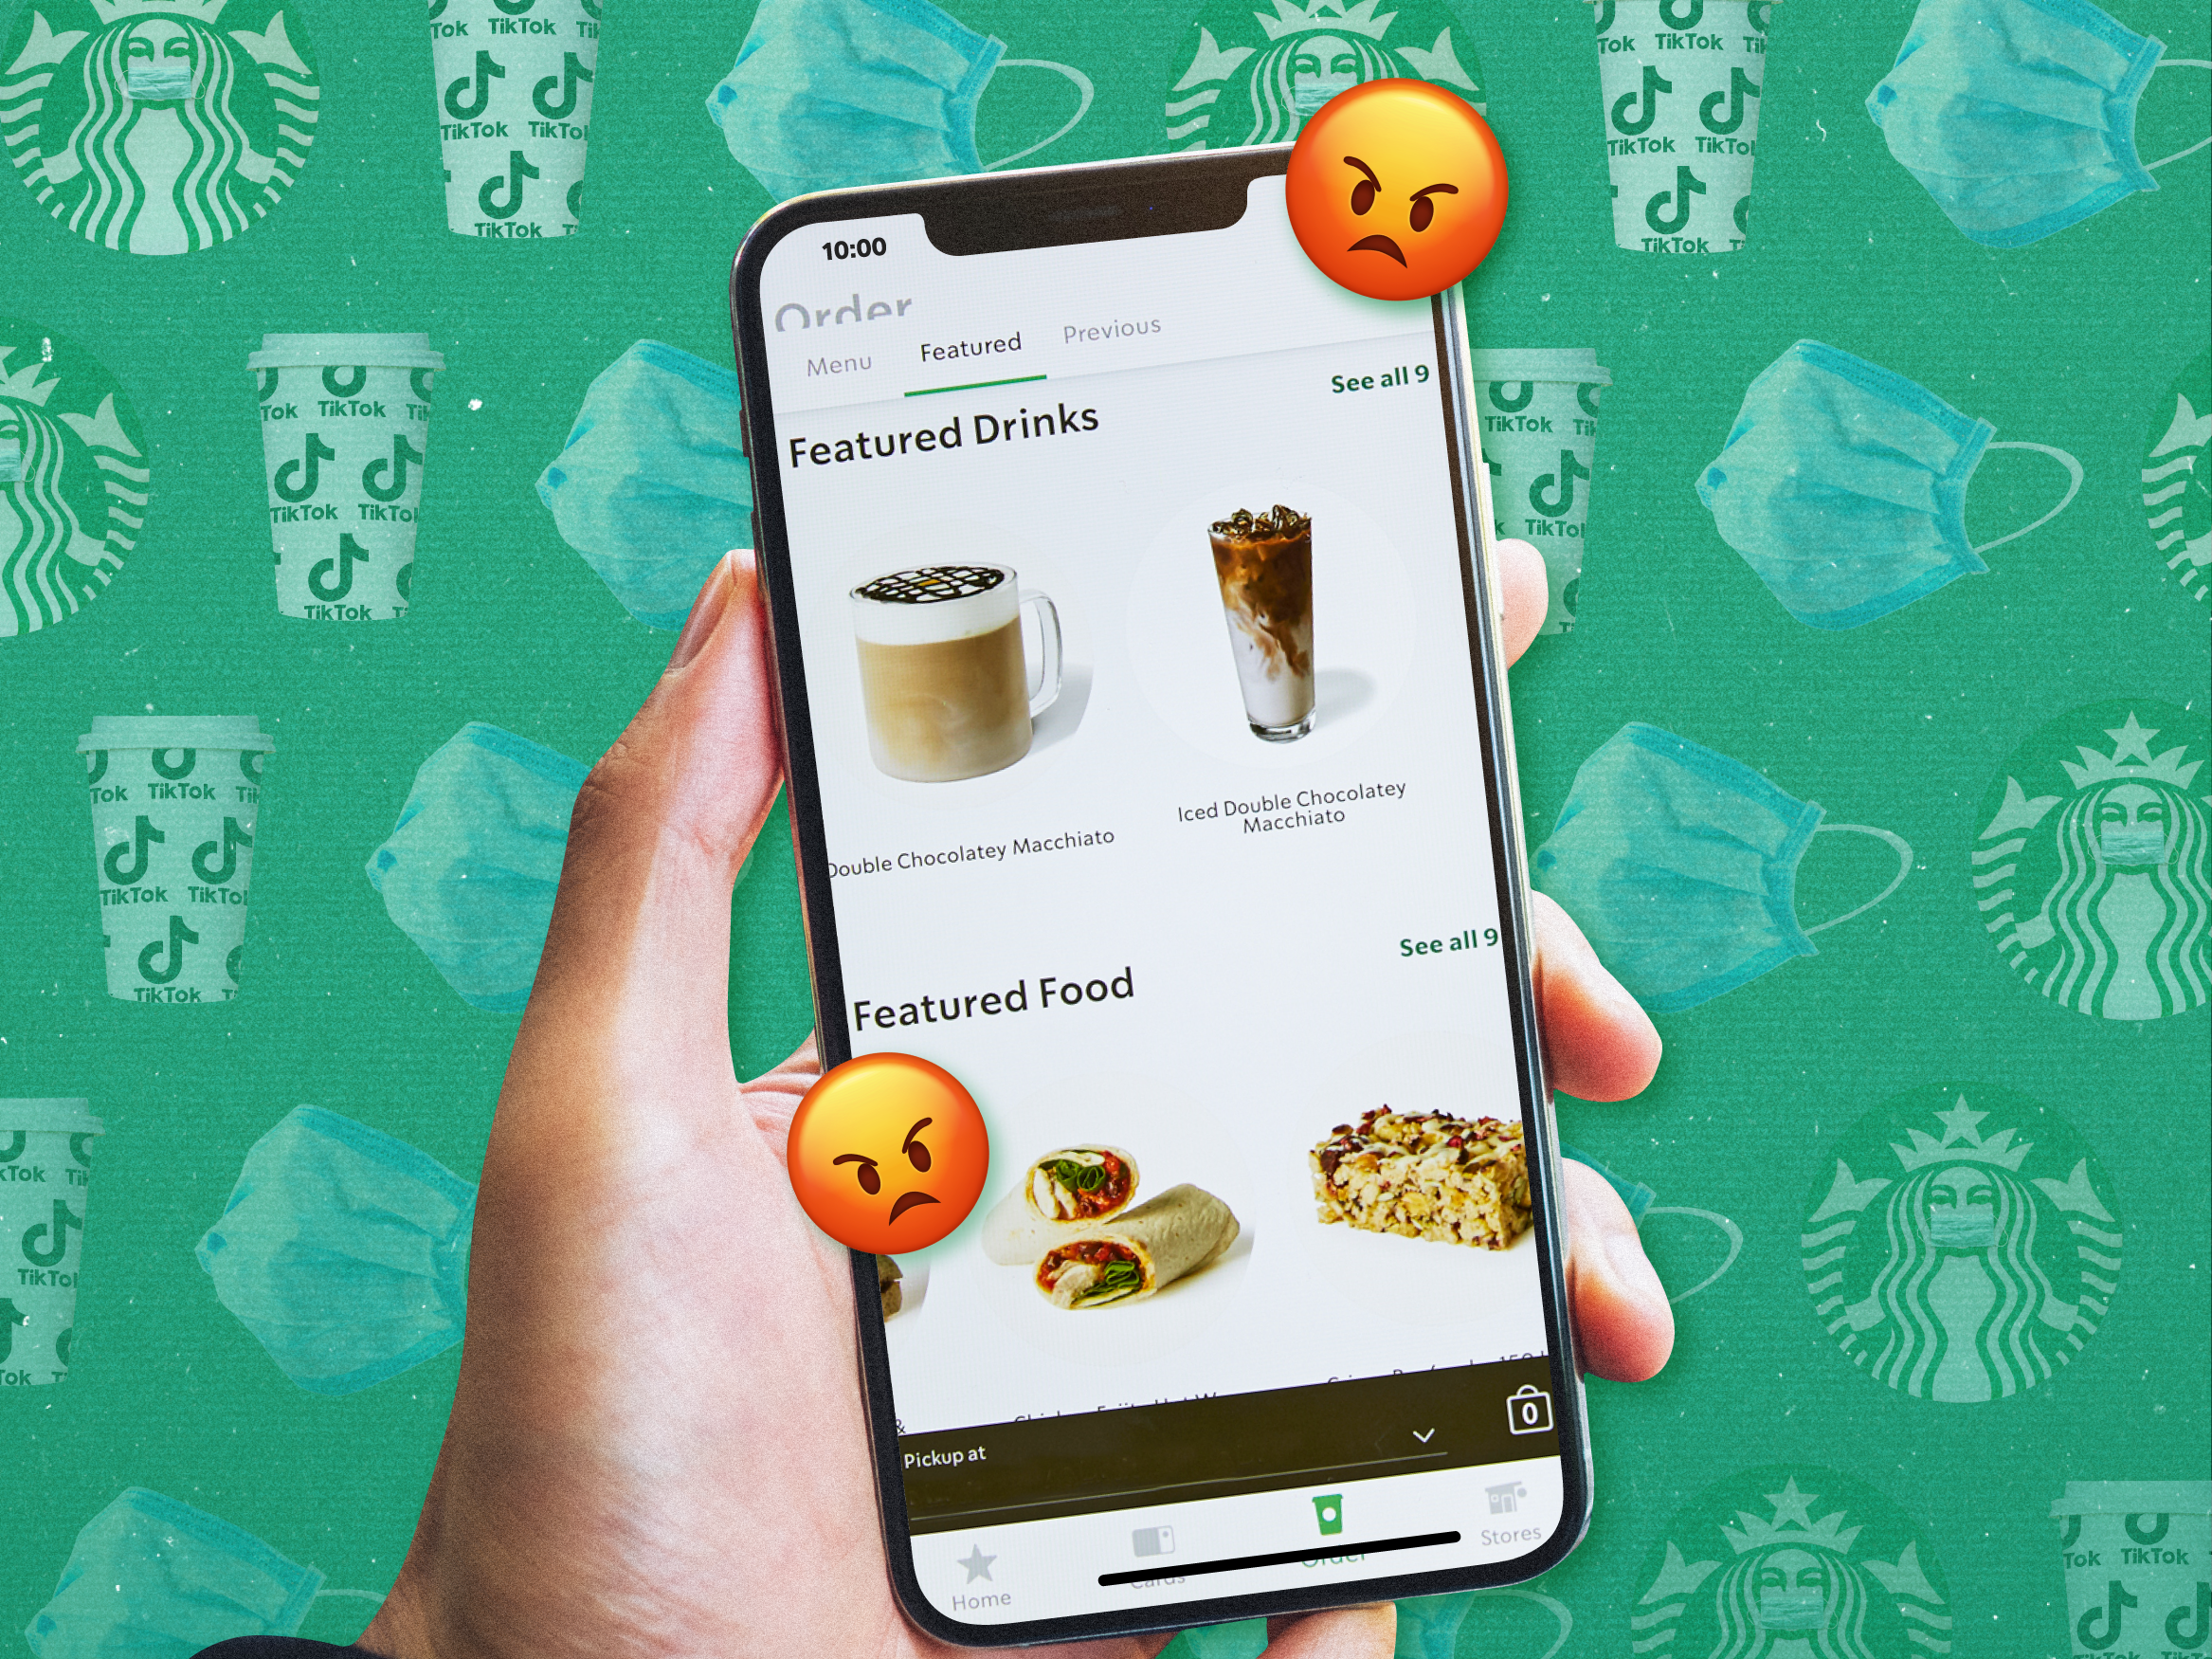 Starbucks mobile app on iPhone, surrounded by angry emojis, Starbucks logo, TikTok logo and face masks 4x3